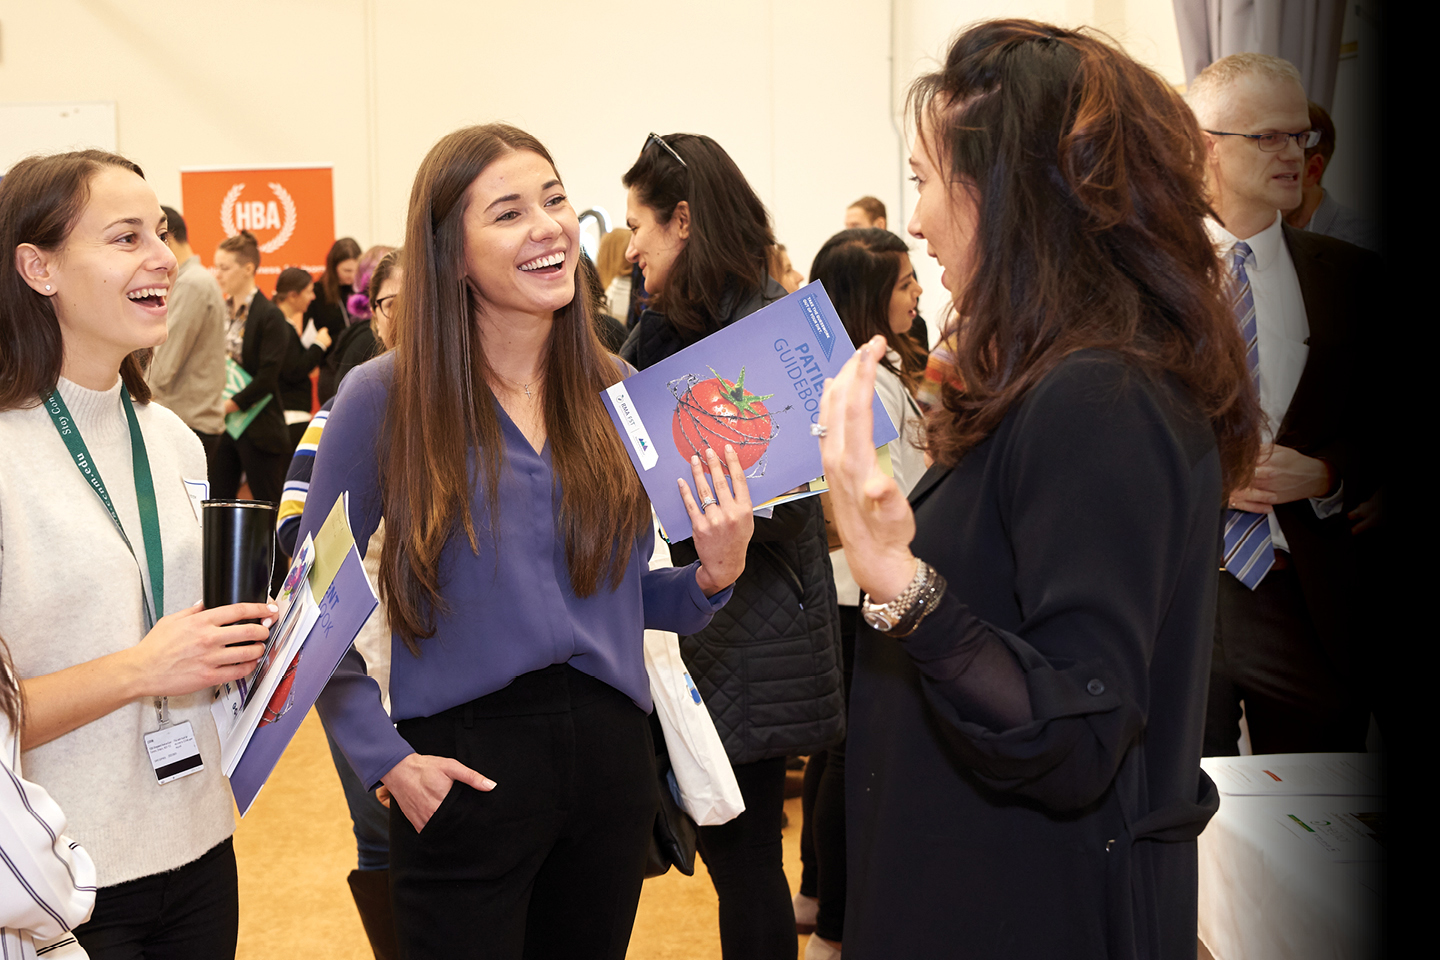 a group of female student chatting at an event